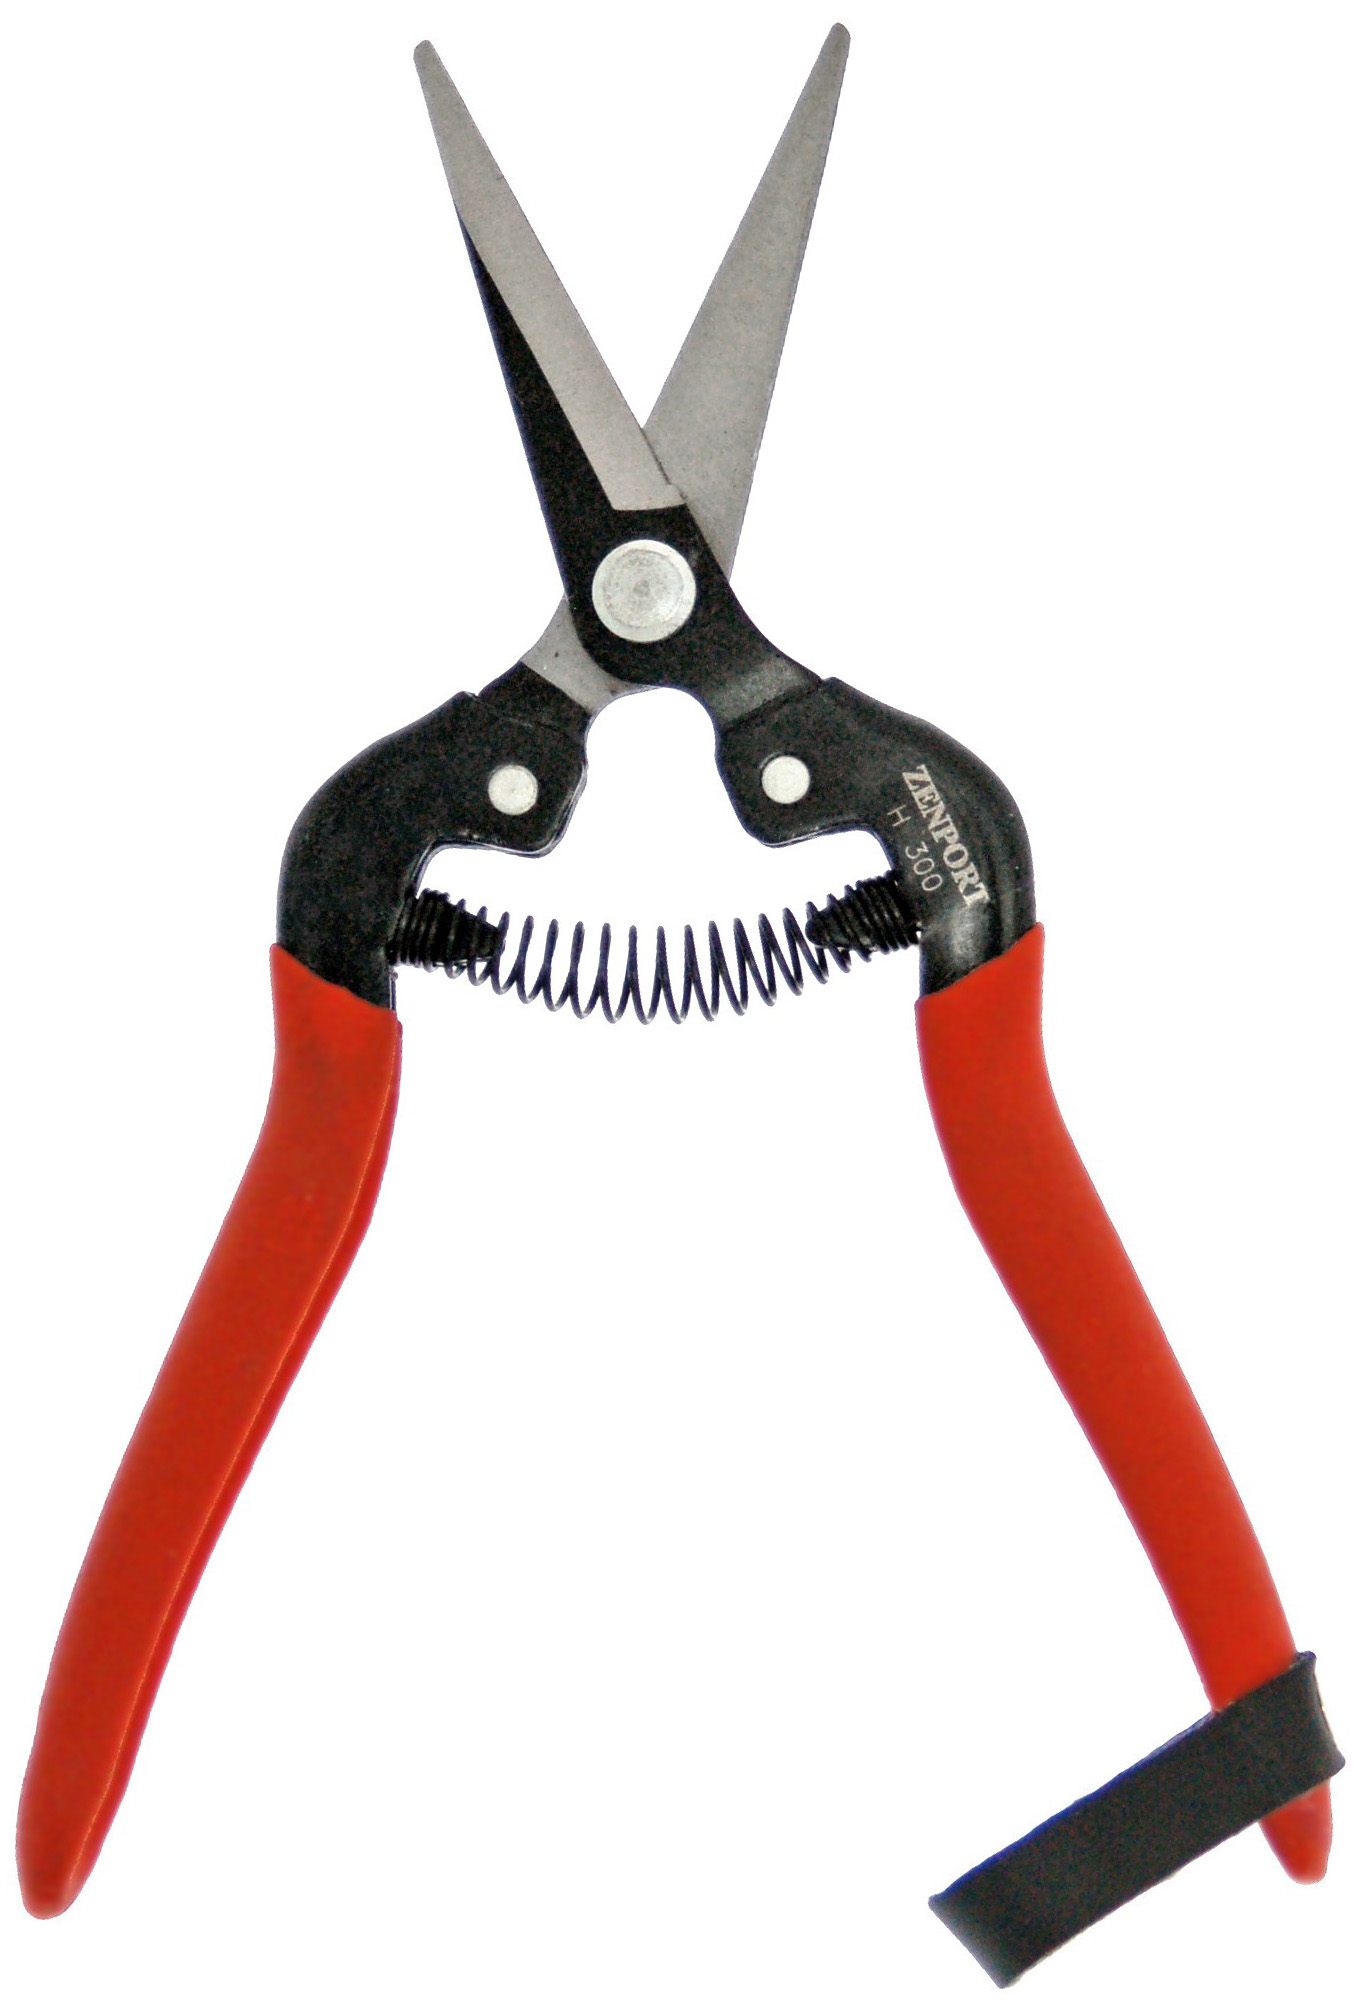 Shears for Harvest and Thinning